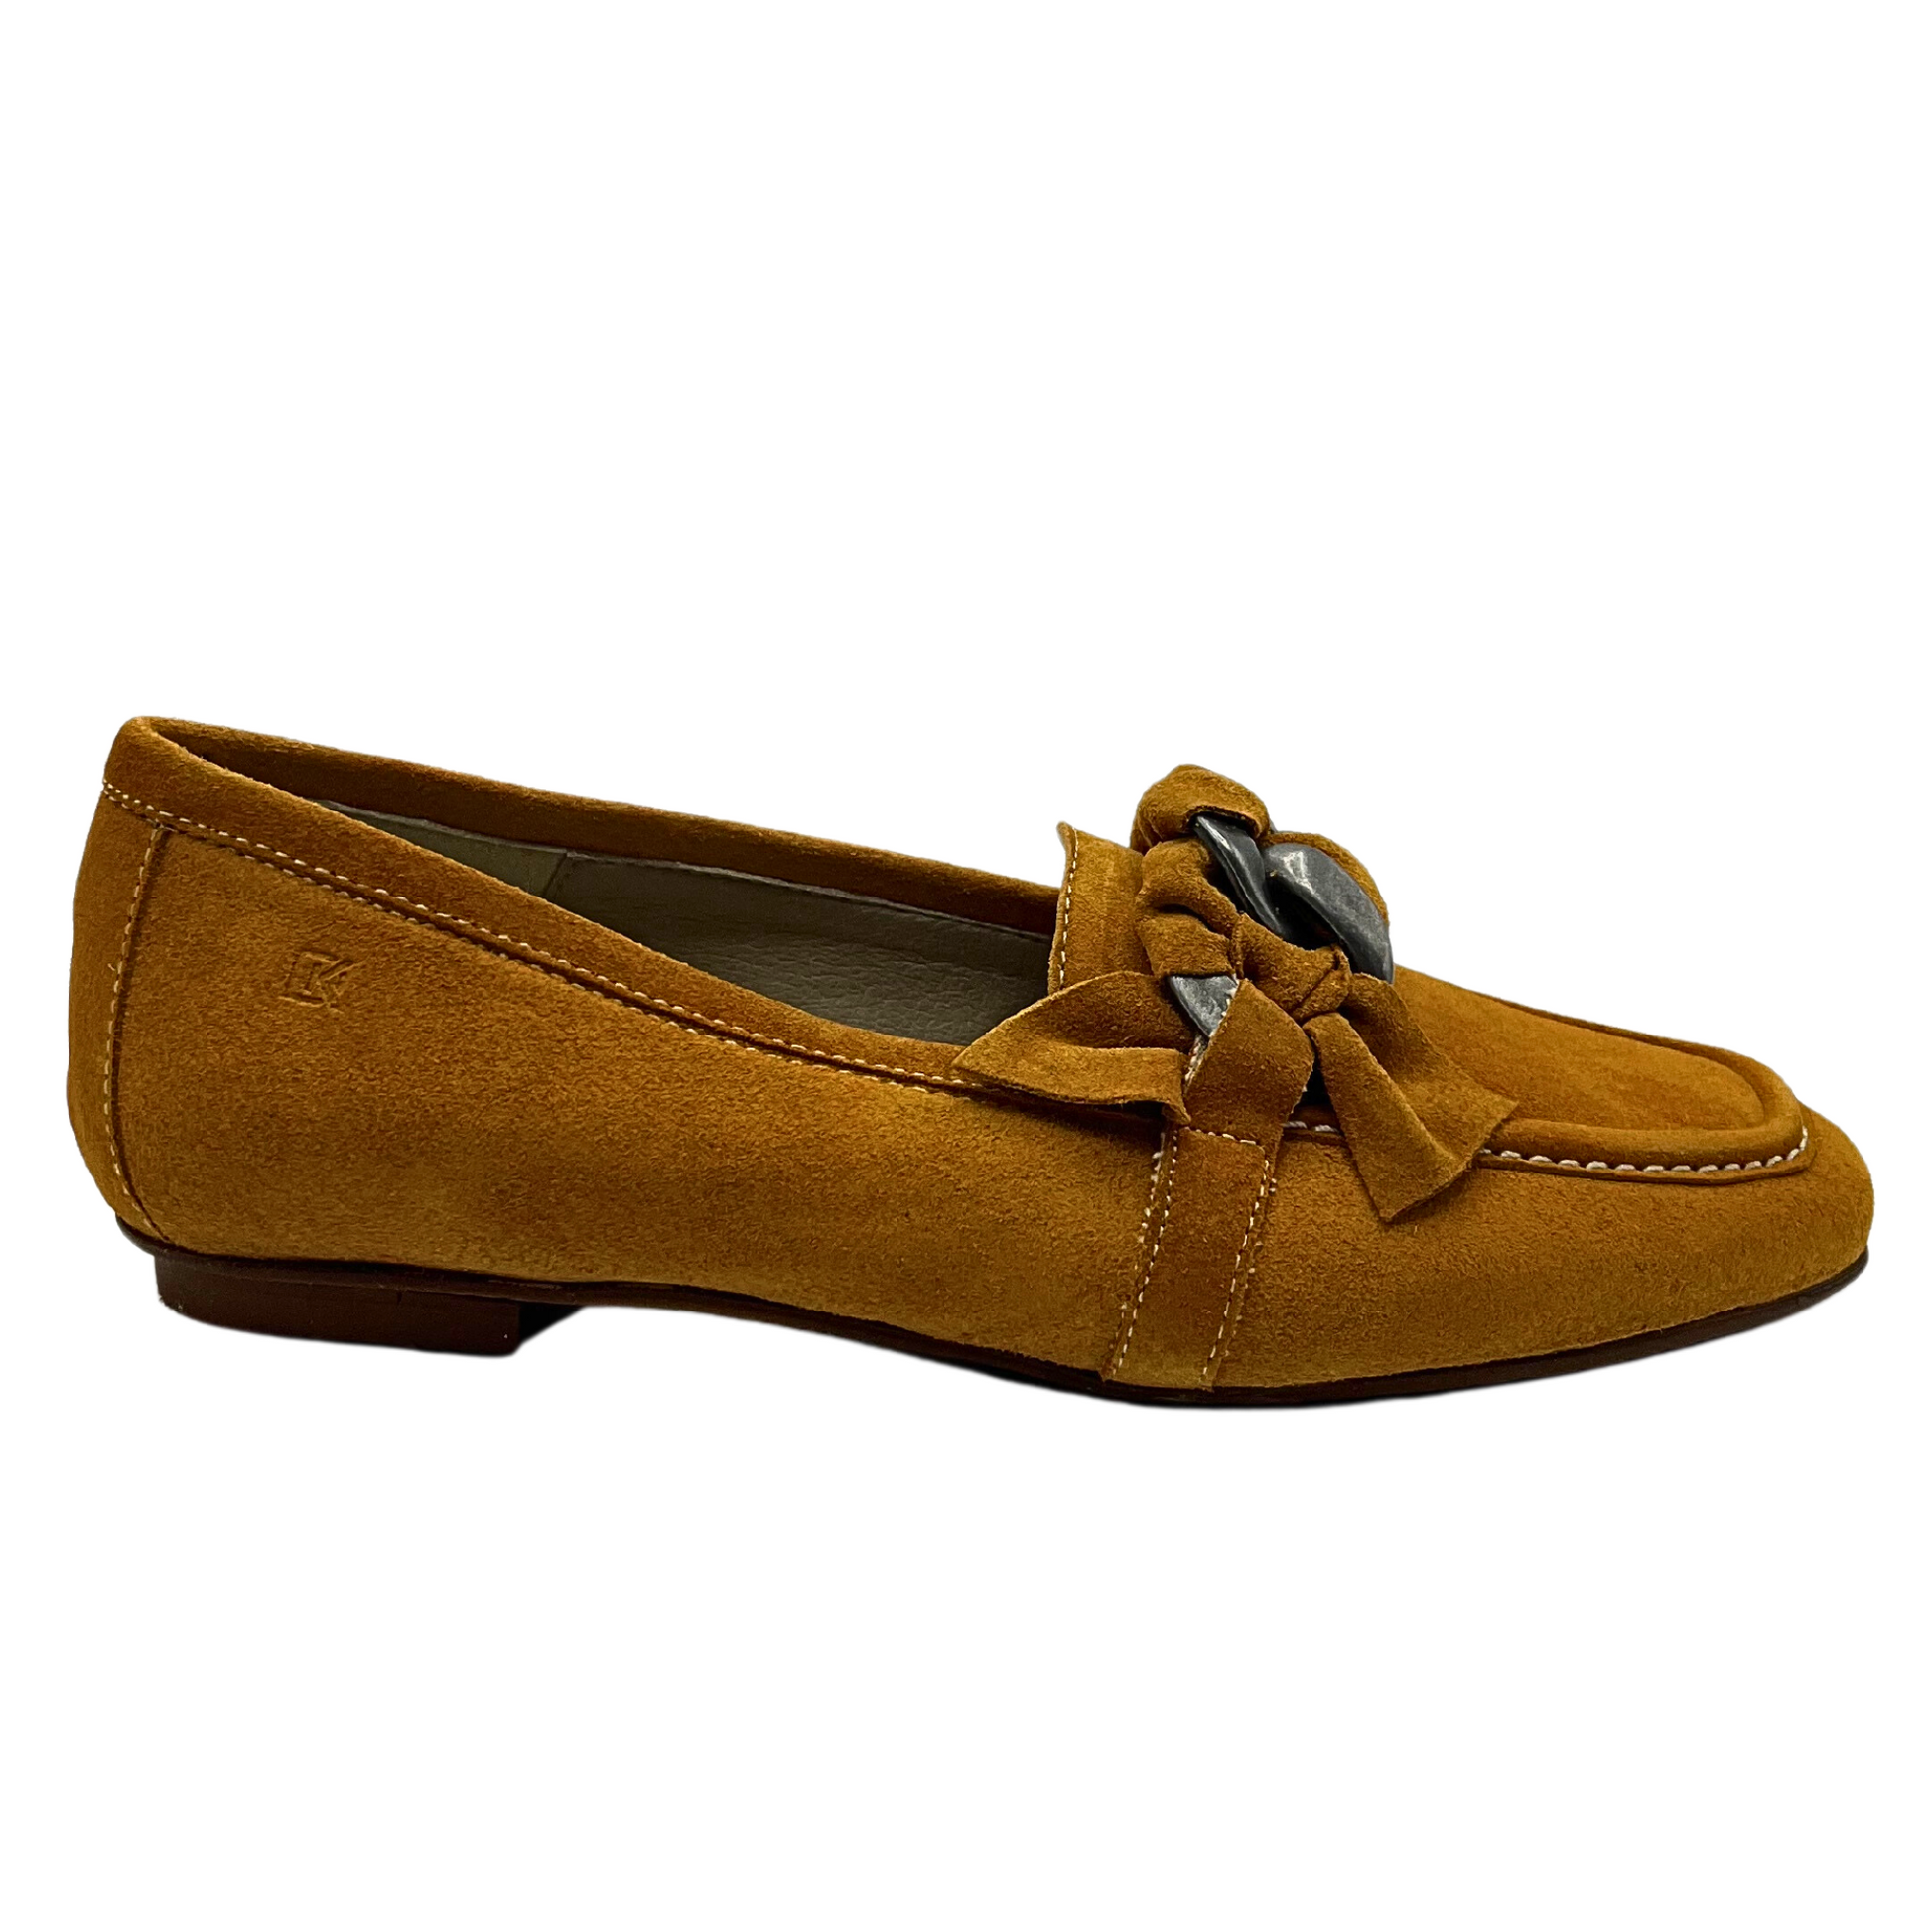 Outside view of moccasin style loafer.  Slip on style with knotted deatil at top with leather woven around a metallic element